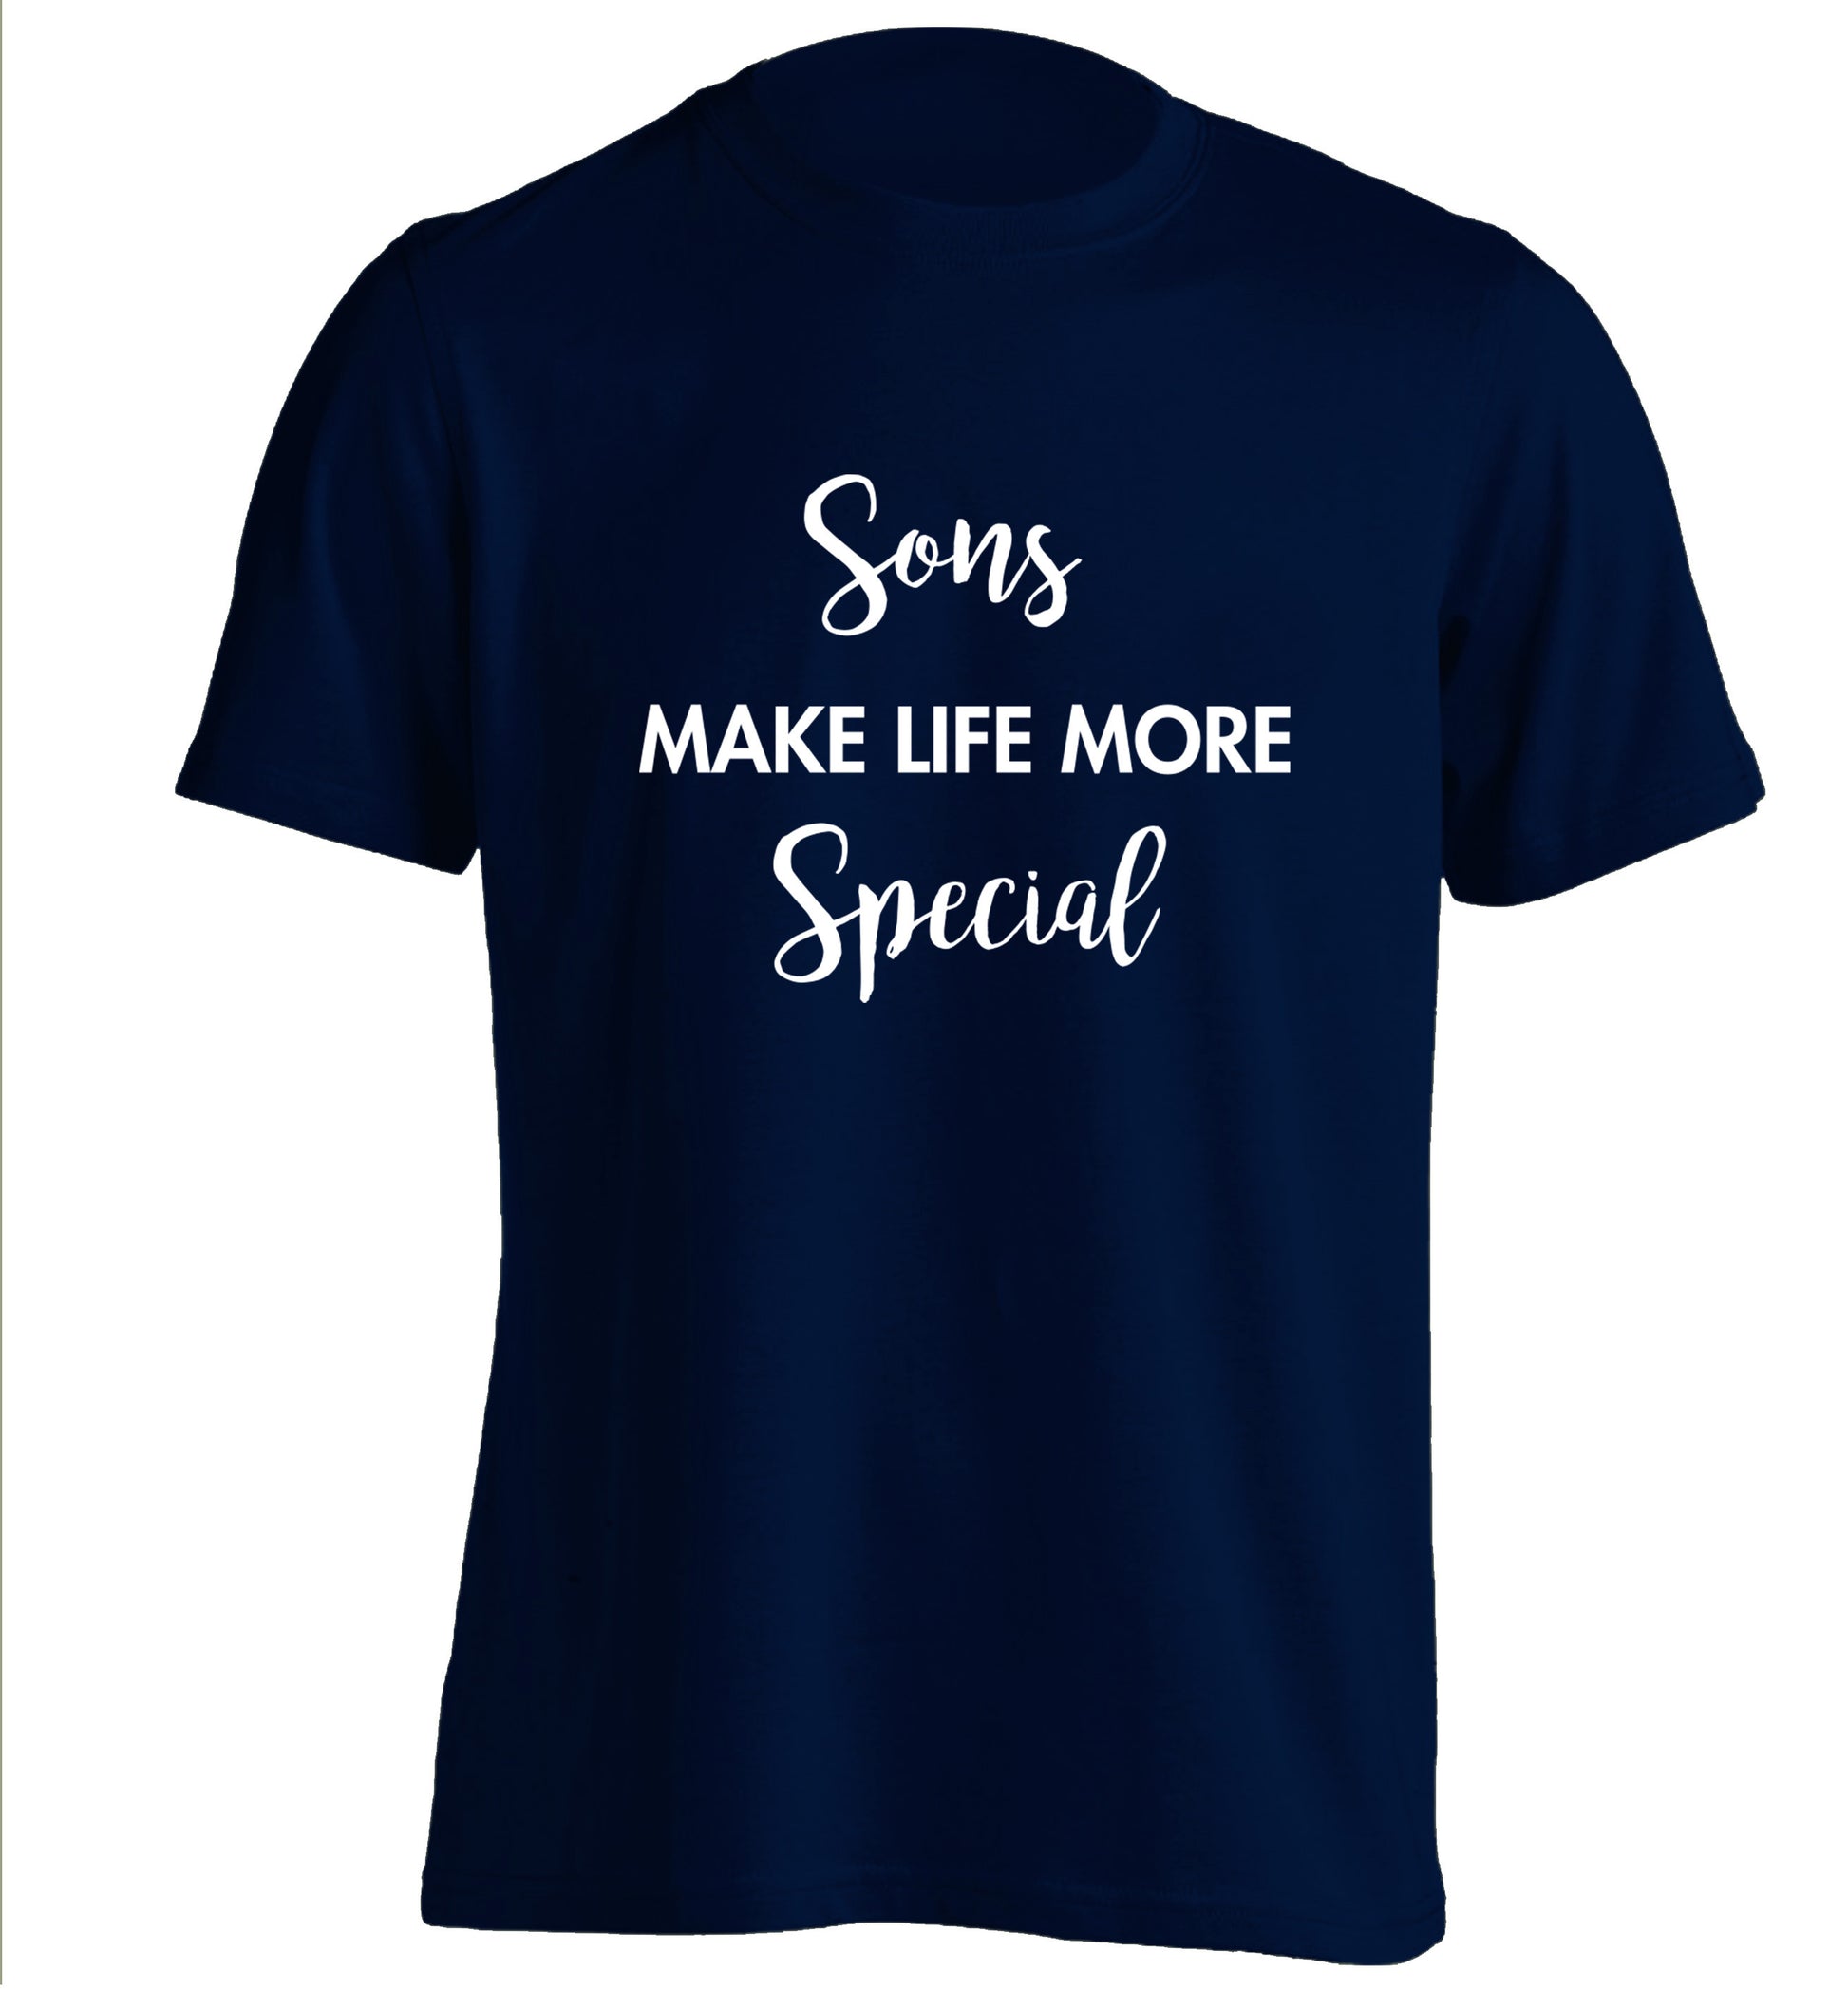 Daughters make life more special adults unisex navy Tshirt 2XL